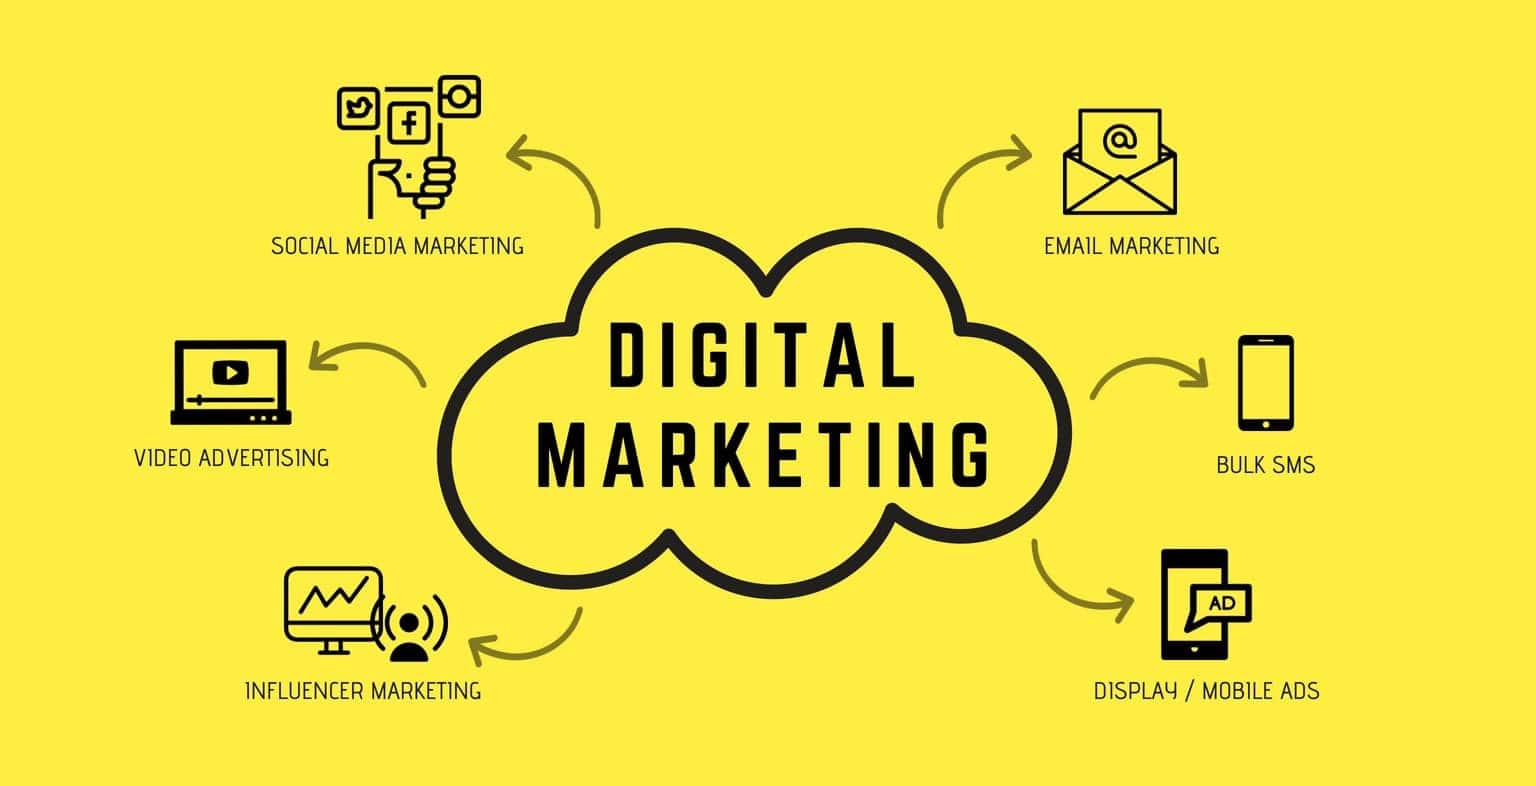 Digital Marketing Tools to Boost Your Business Growth